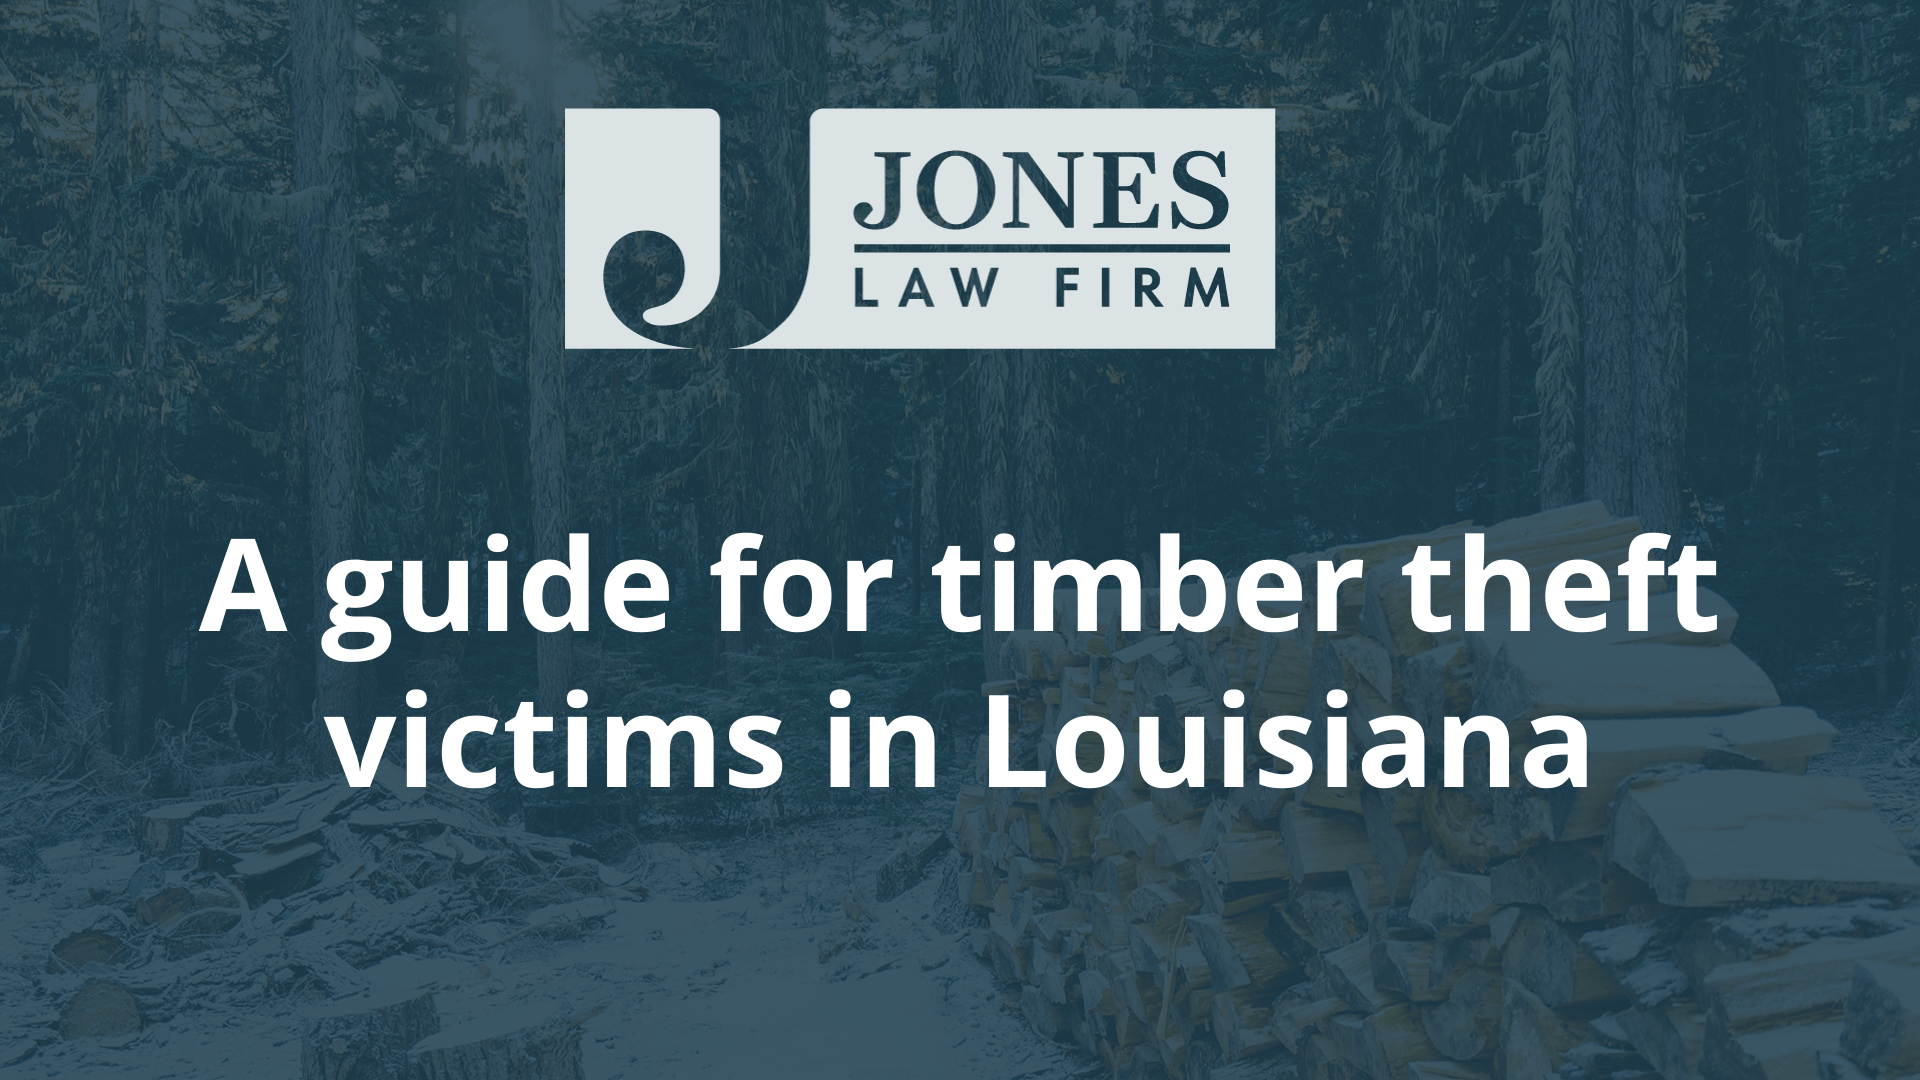 A guide for timber theft victims in Louisiana - jones law firm - louisiana